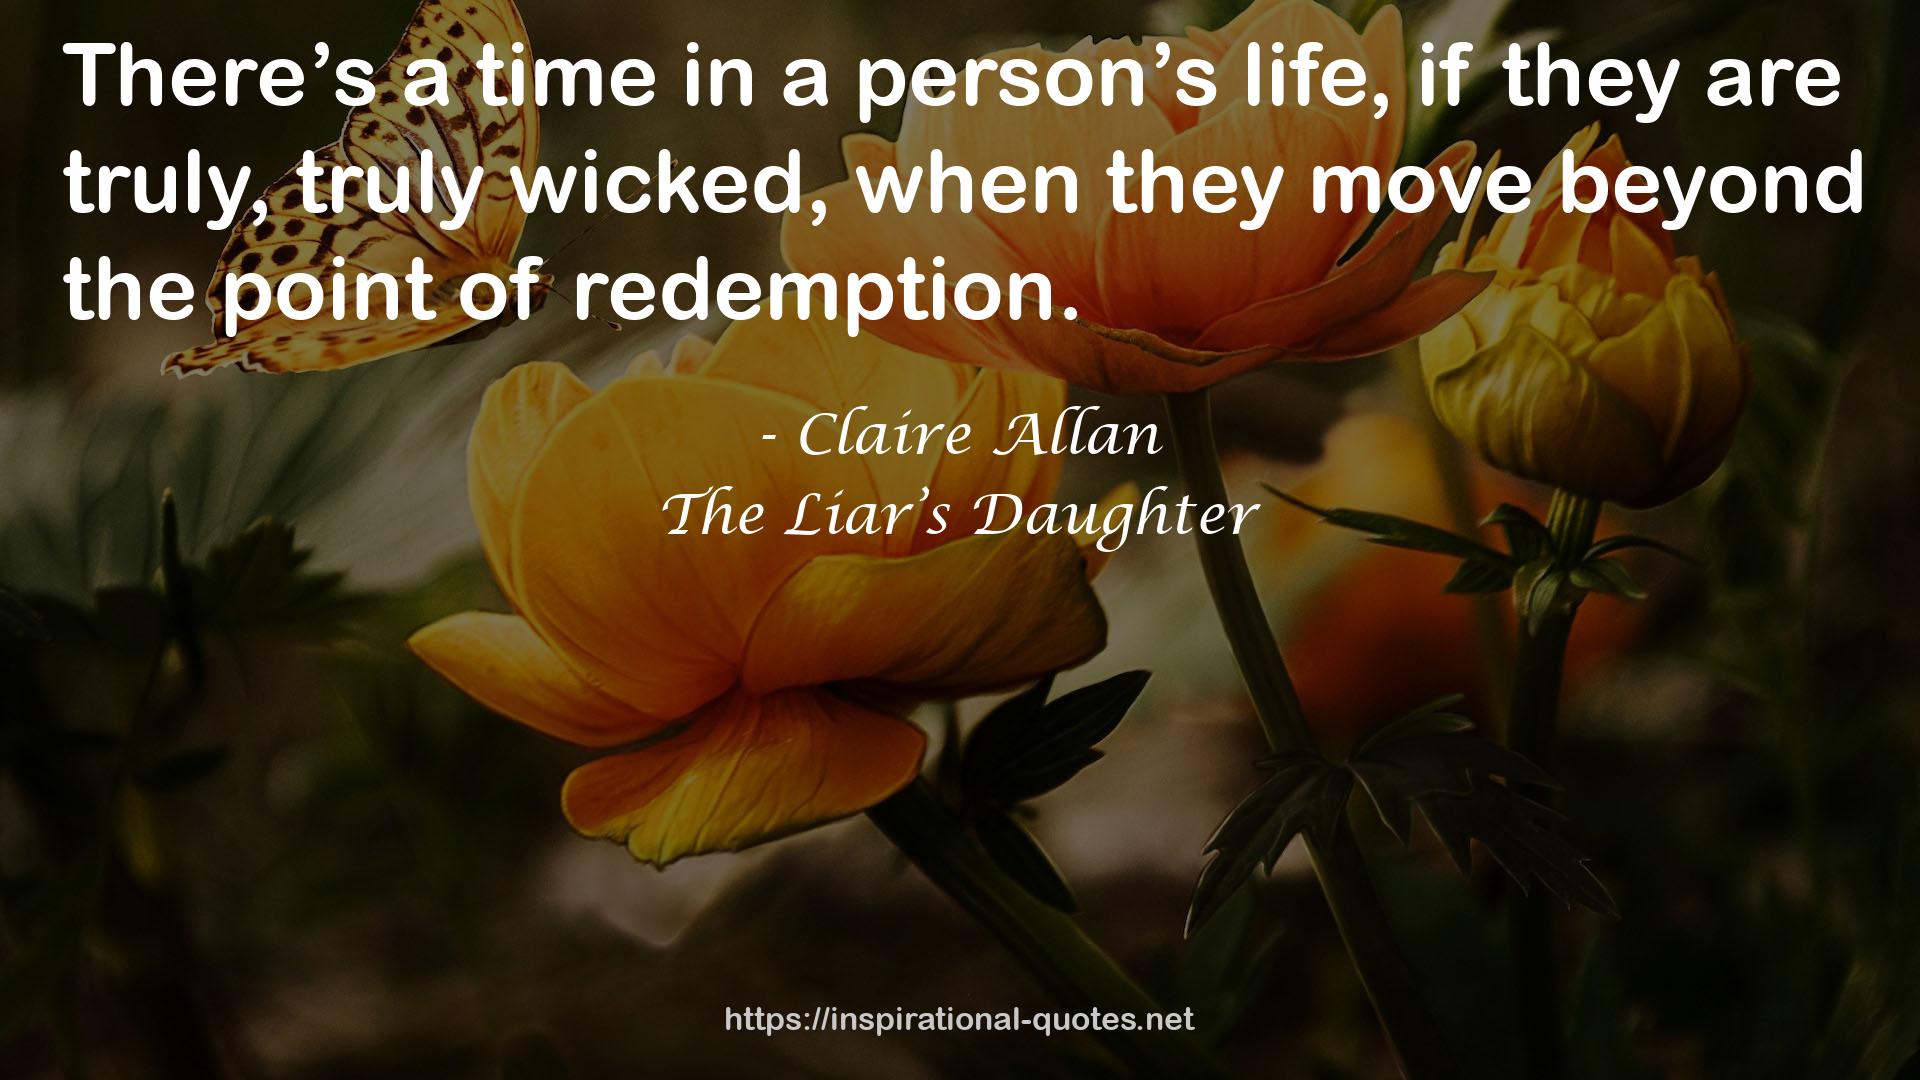 The Liar’s Daughter QUOTES